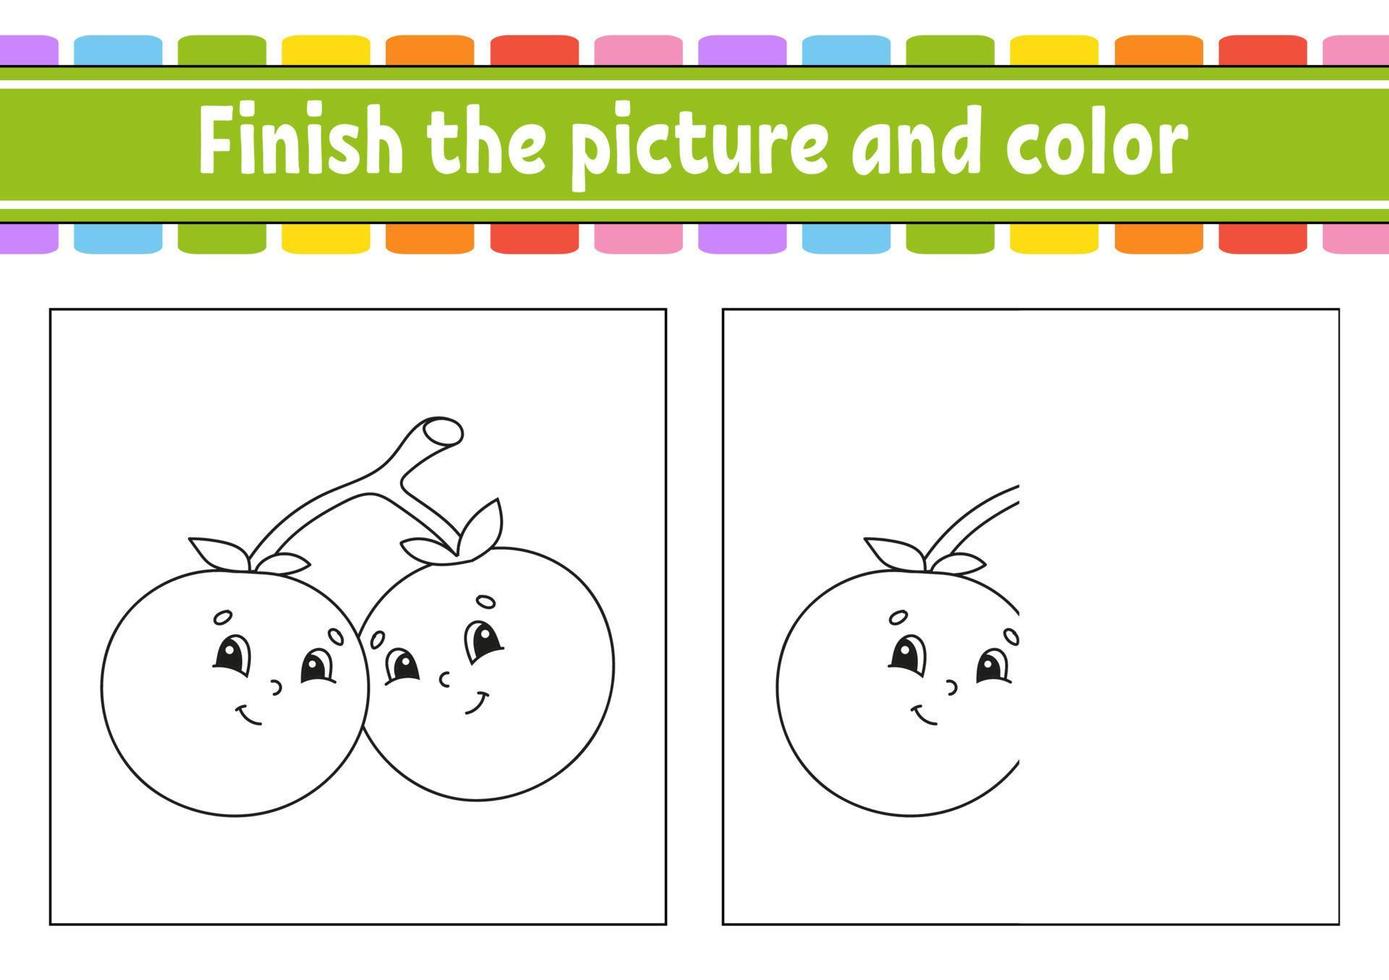 Finish the picture and color. cartoon character isolated on white background. For kids education. Activity worksheet. vector